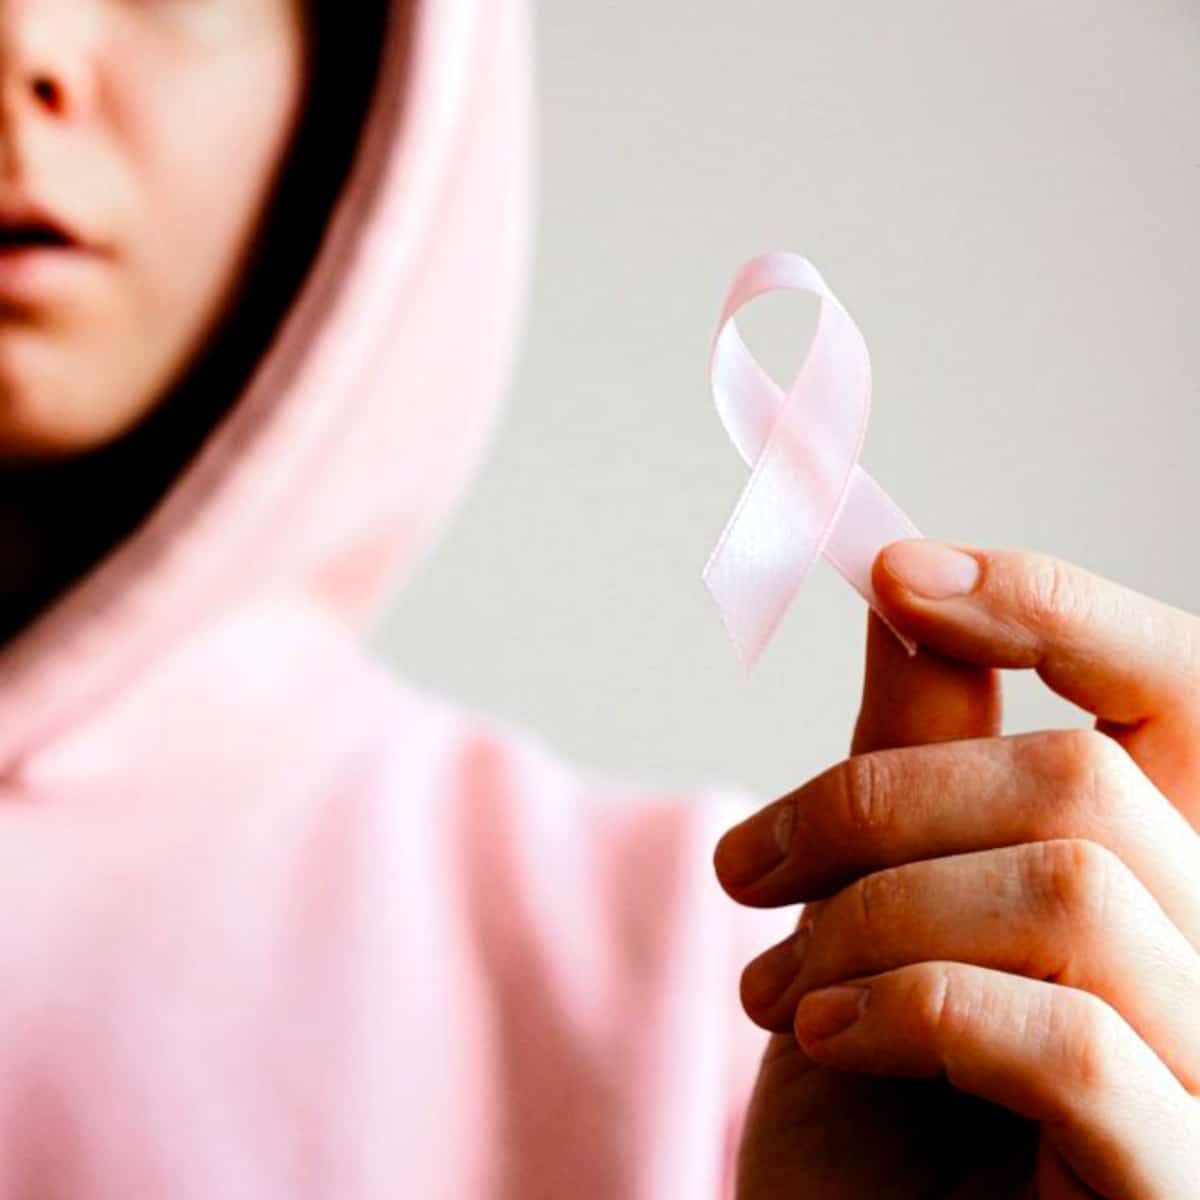 a person in pink holding a ribbon that represents fighting cancer